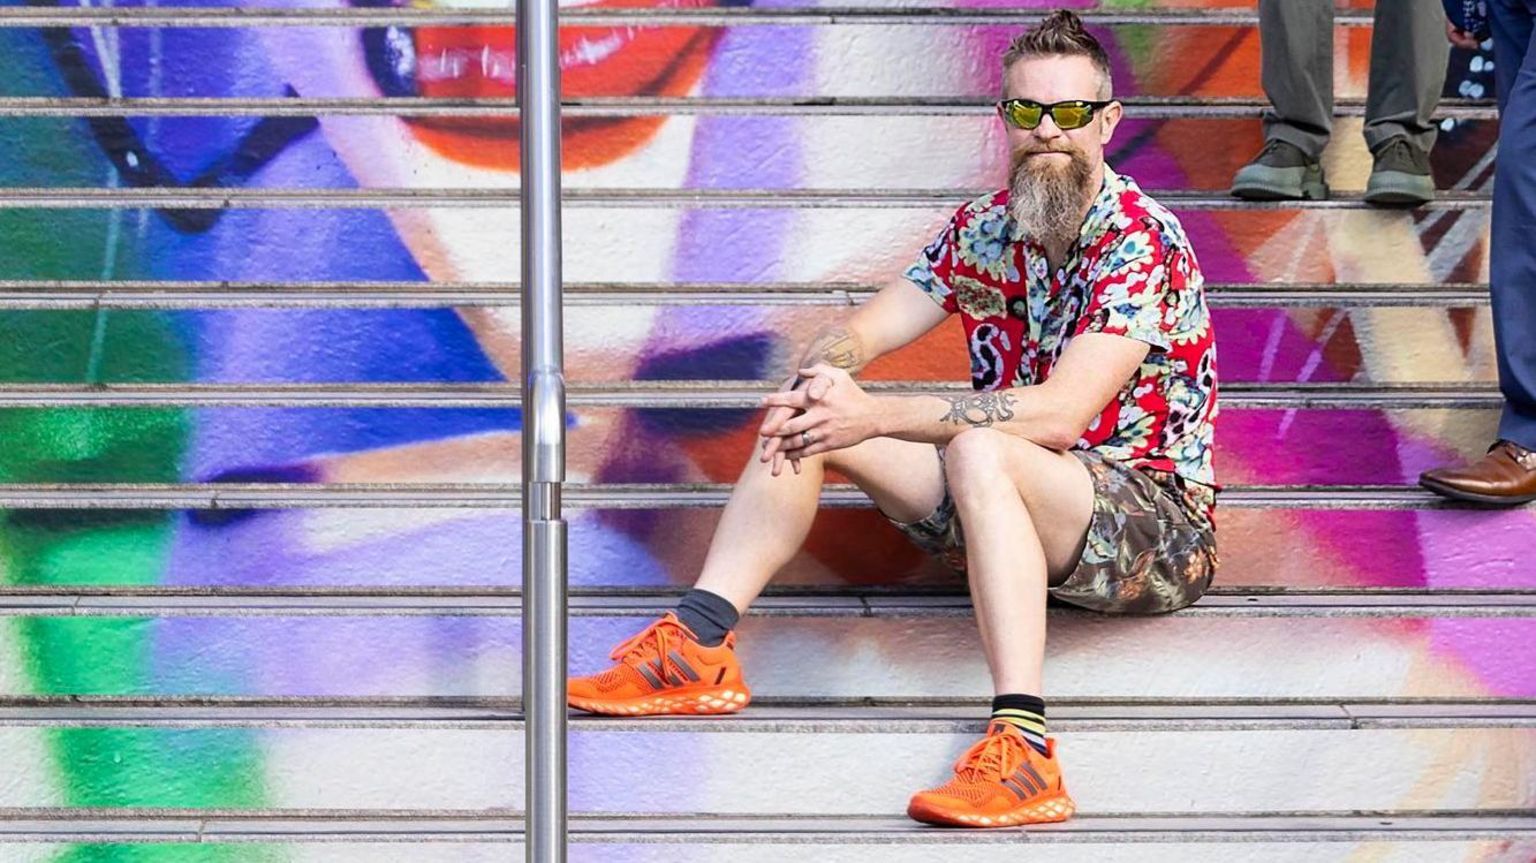 Frank Styles sitting on the steps, which are covered in a Taylor Swift image. He has a beard and wears sunglasses, and is dressed in shorts and a shirt, with orange trainers